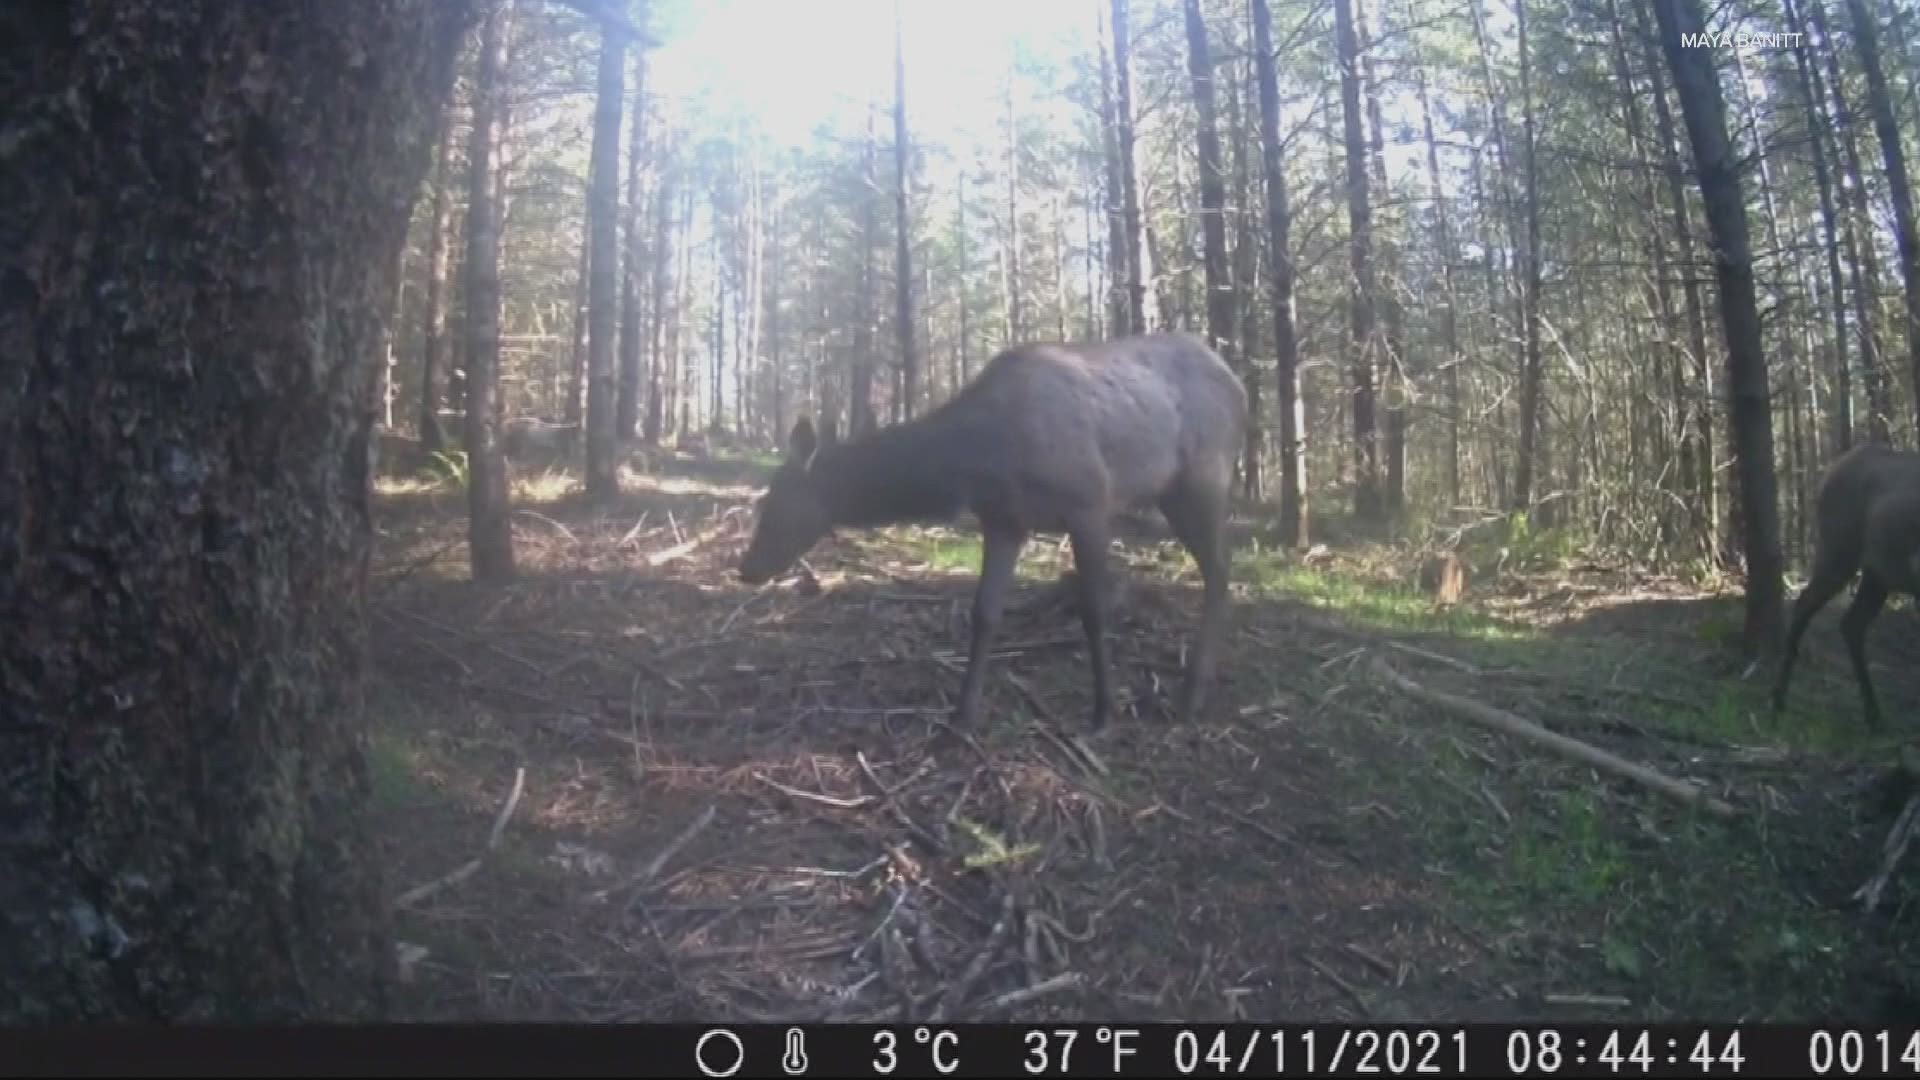 When Maya Banitt’s trail cam went missing she had a good idea what happened to it. She had no idea how entertaining the footage would be.